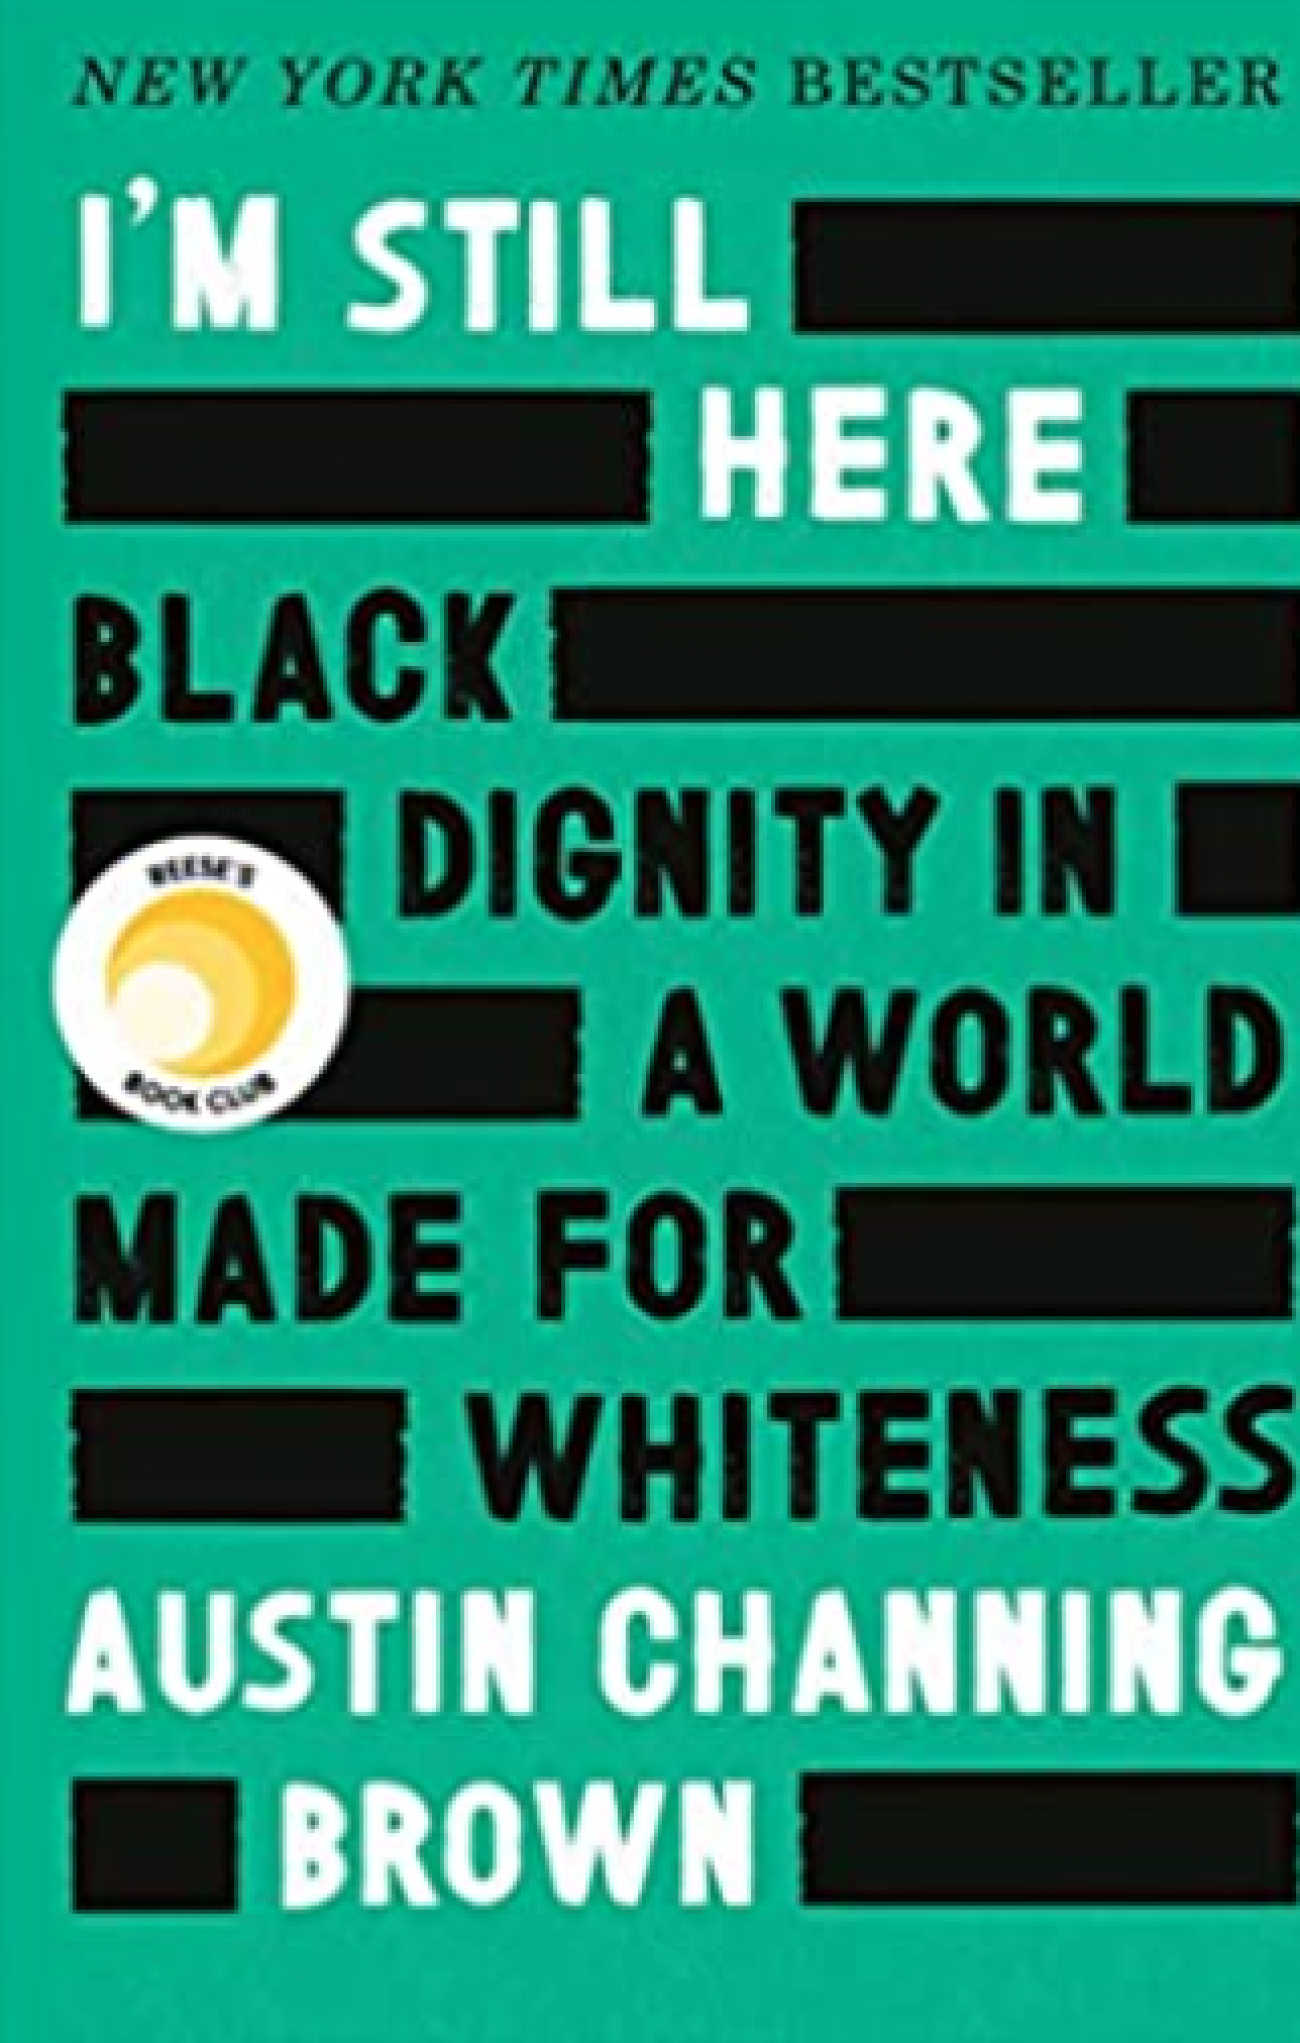 Austin Channing Brown book cover